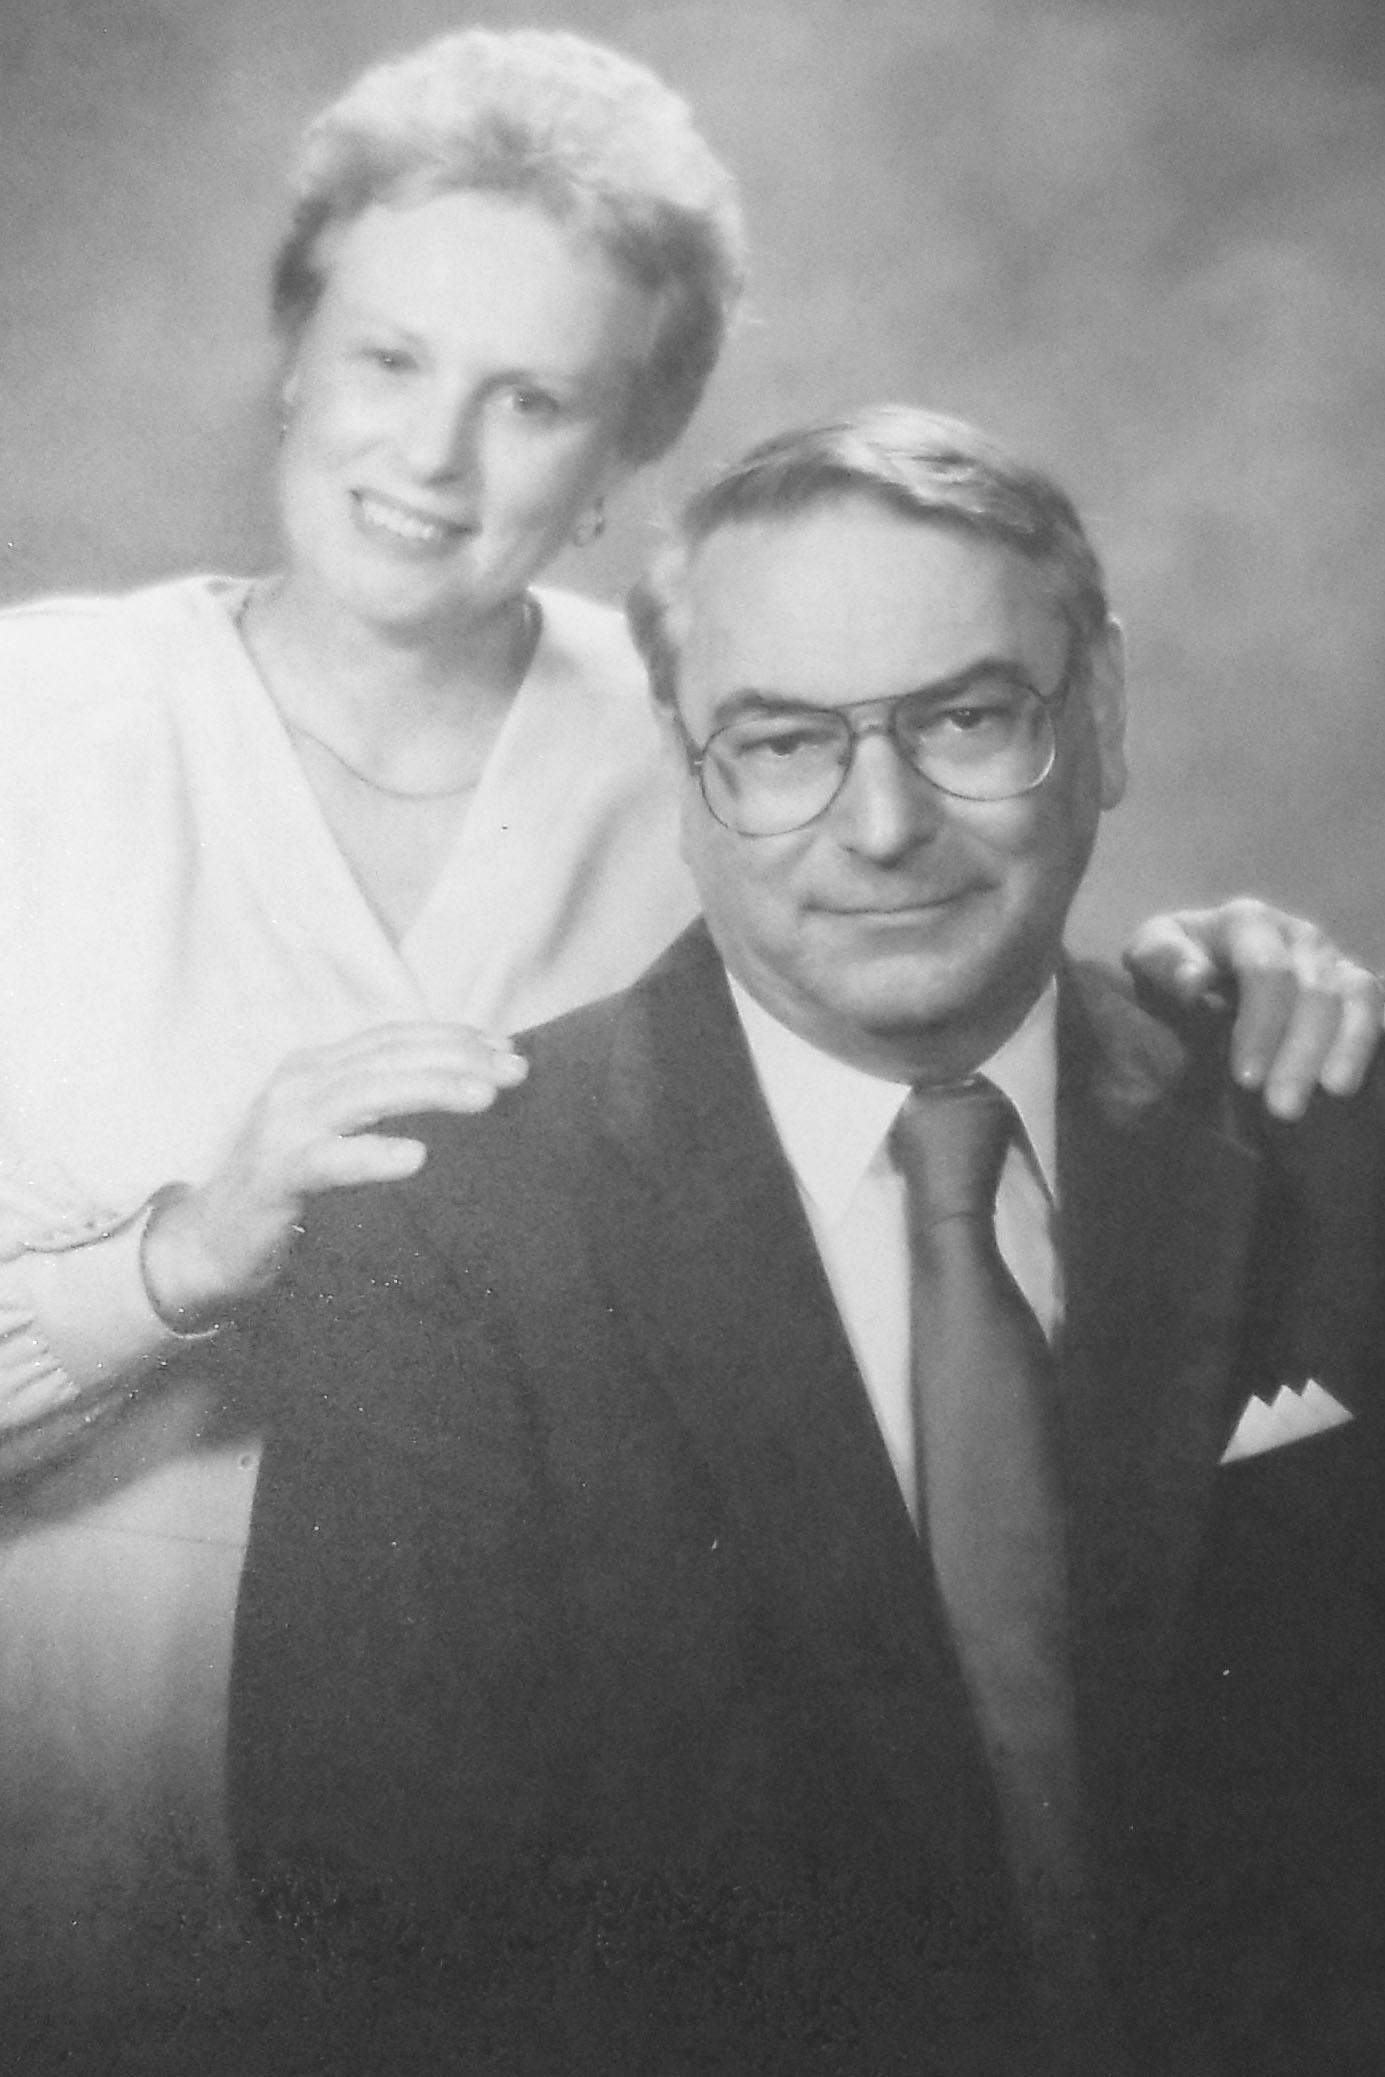 George and Pauline Duclos